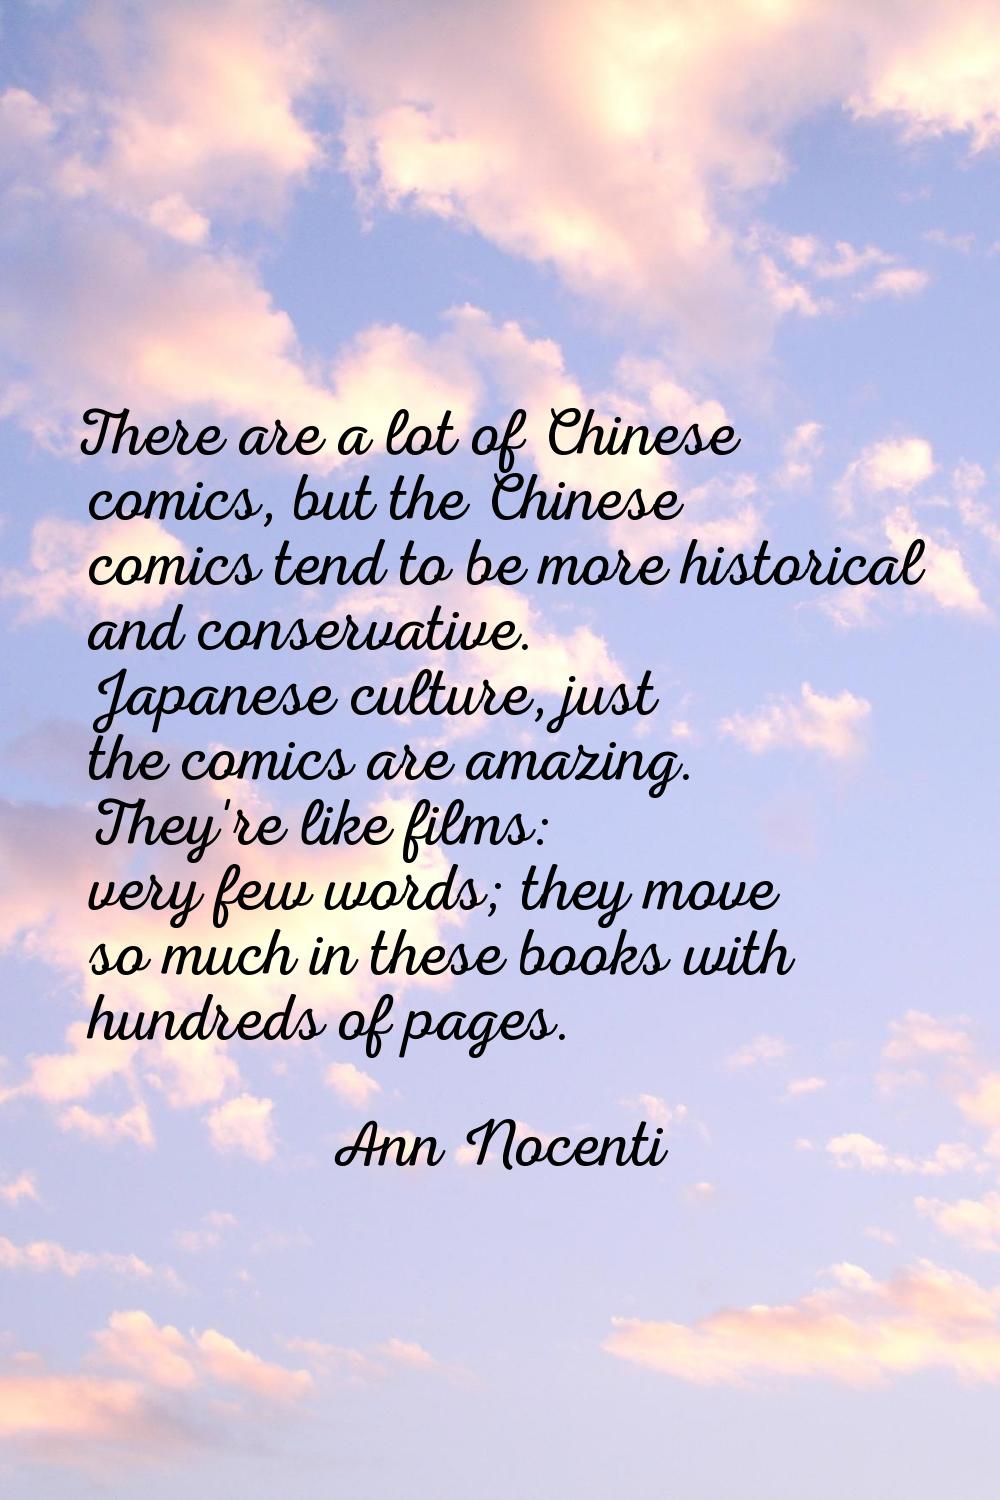 There are a lot of Chinese comics, but the Chinese comics tend to be more historical and conservati